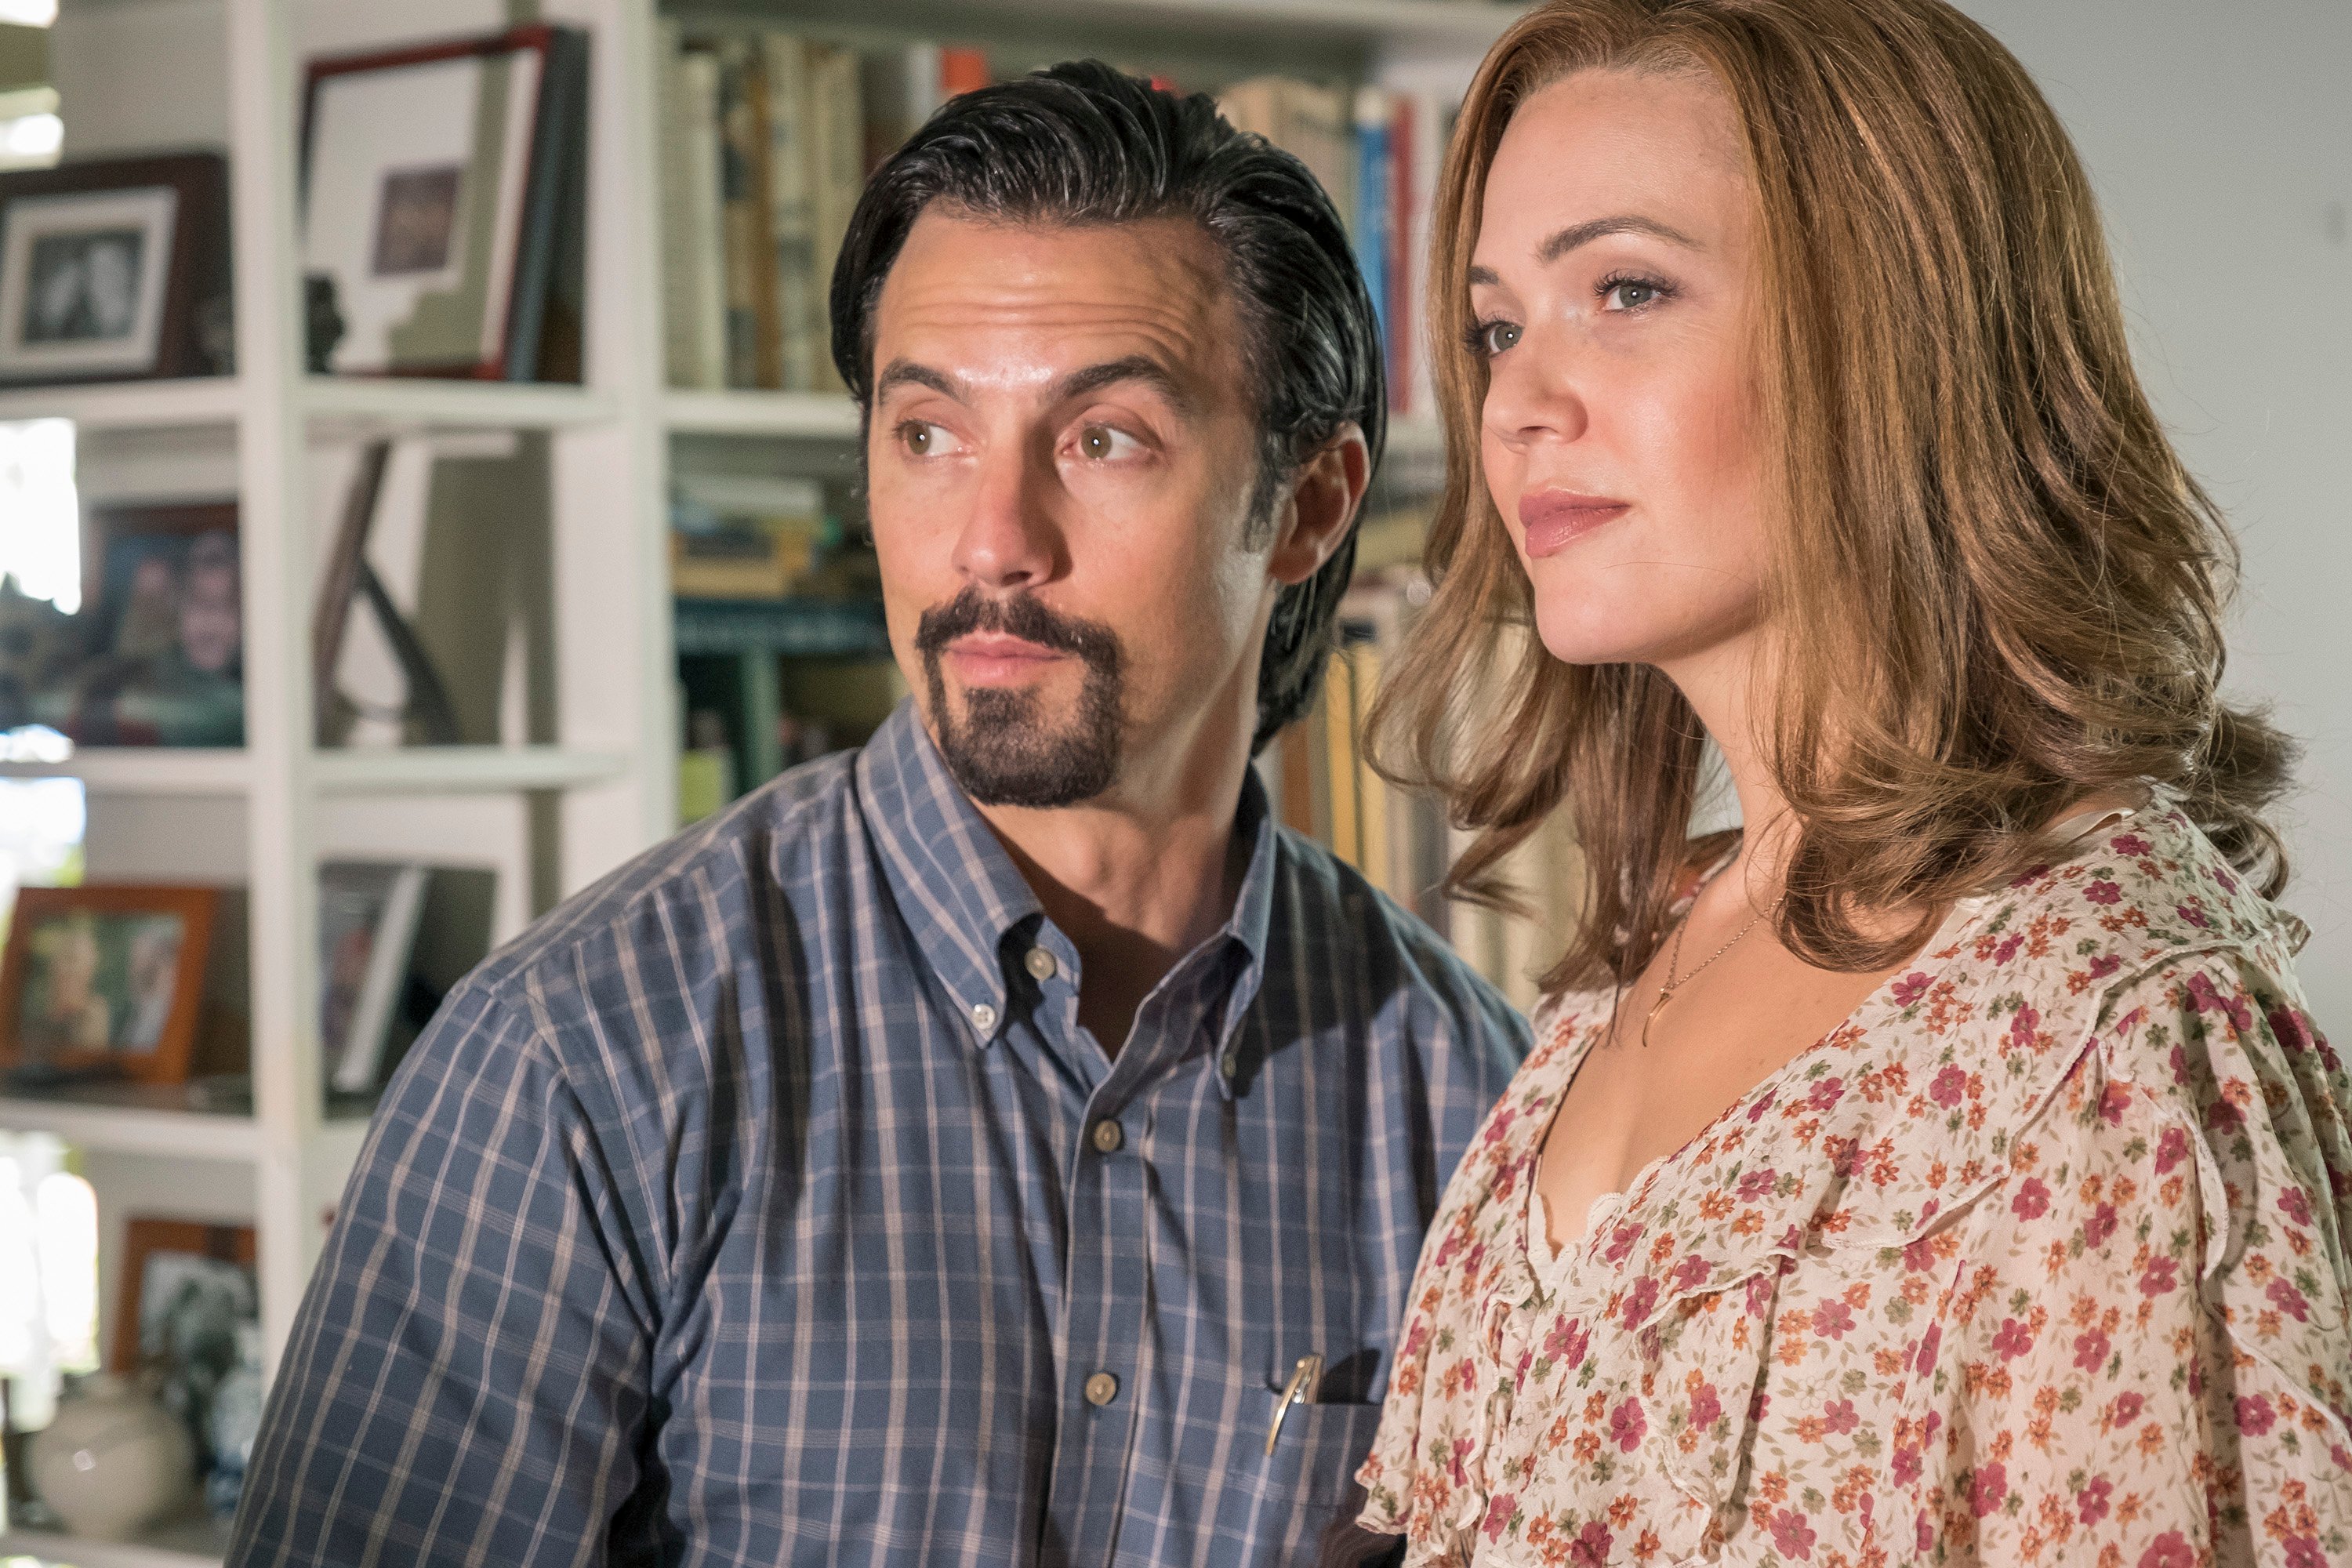 Milo Ventimiglia and Mandy Moore, in character as Jack and Rebecca in 'This Is Us' Season 3, share a scene. Jack wears a blue plaid button-up long-sleeved shirt. Rebecca wears a white, pink, and orange floral dress.